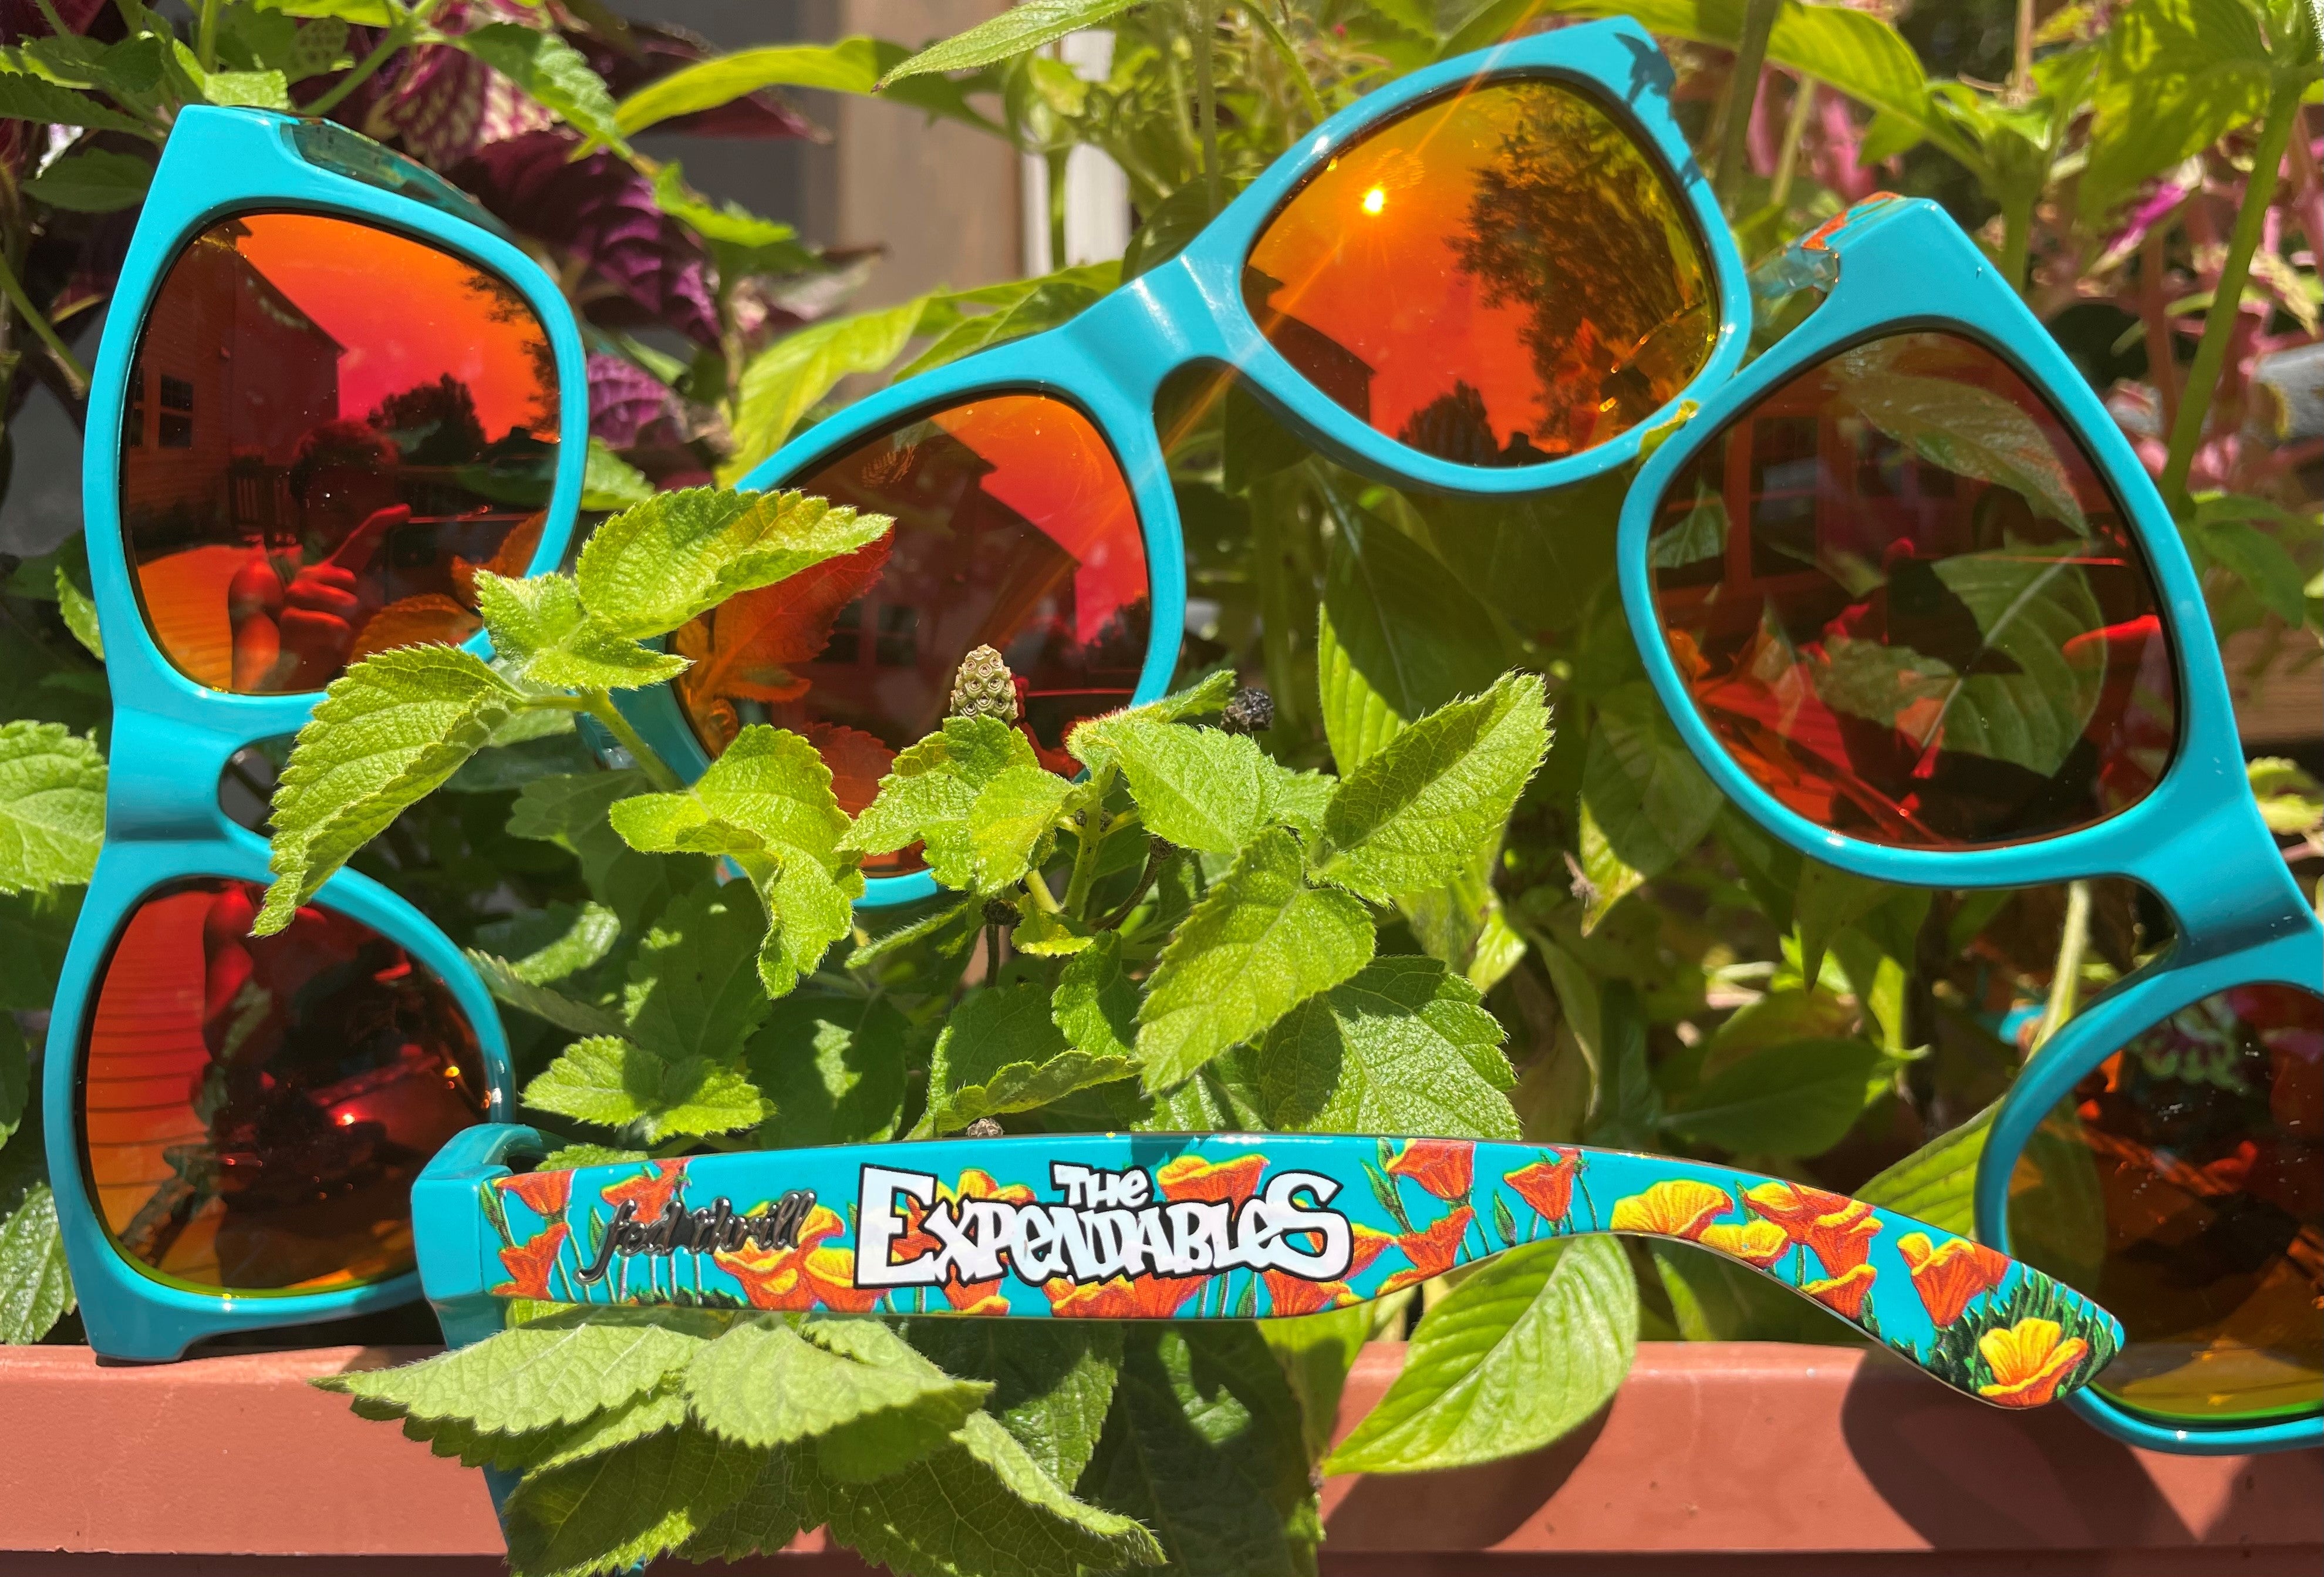 The Expendables - V1 Limited Edition - Pleasure Point Shades - Teal with Orange/Red Lenses